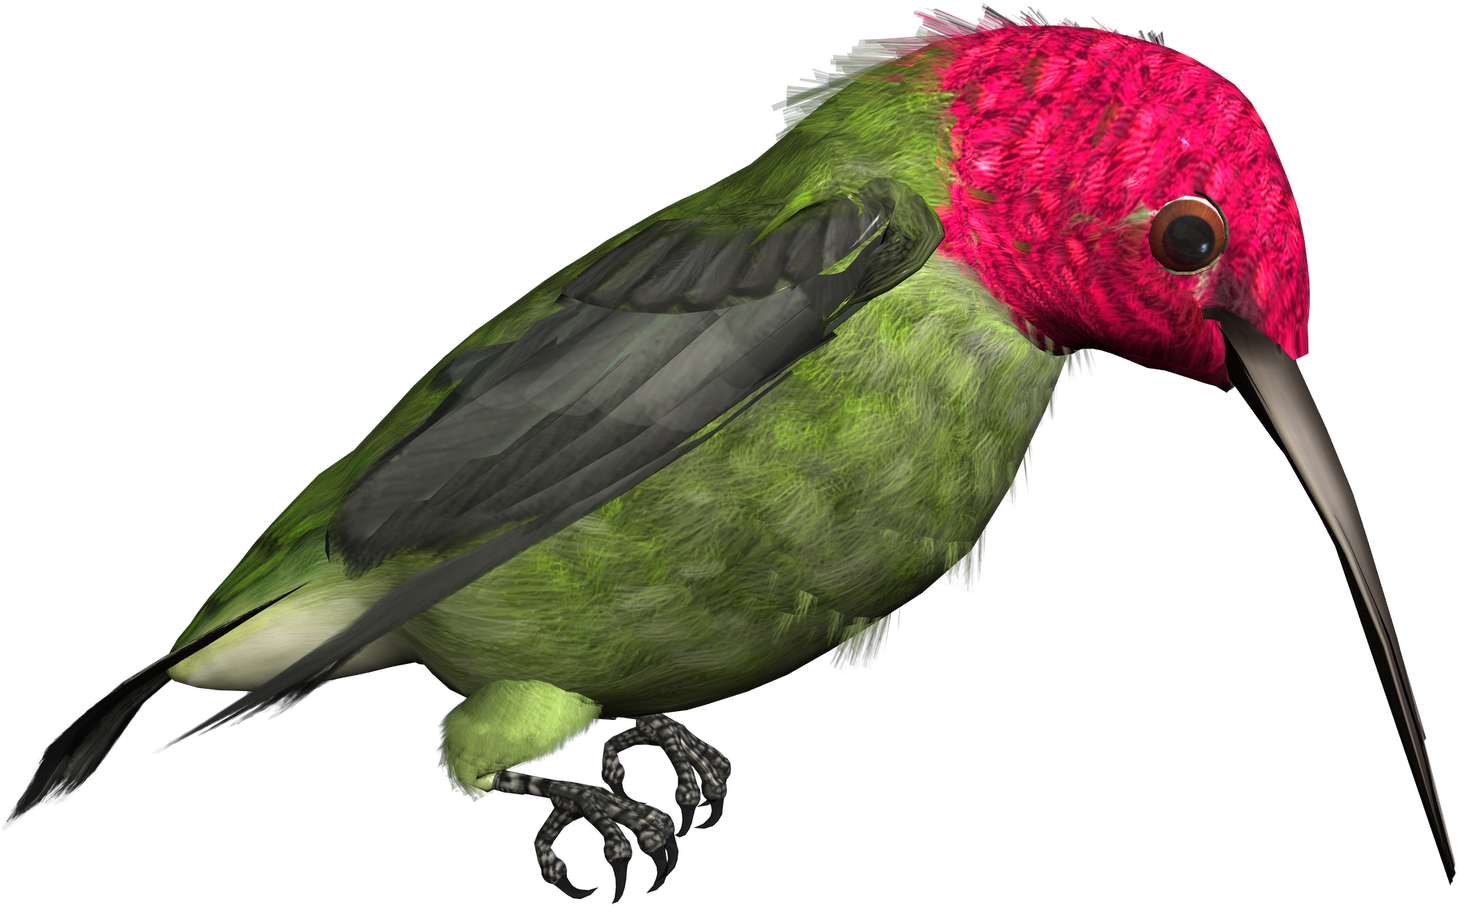 A Green And Pink Bird